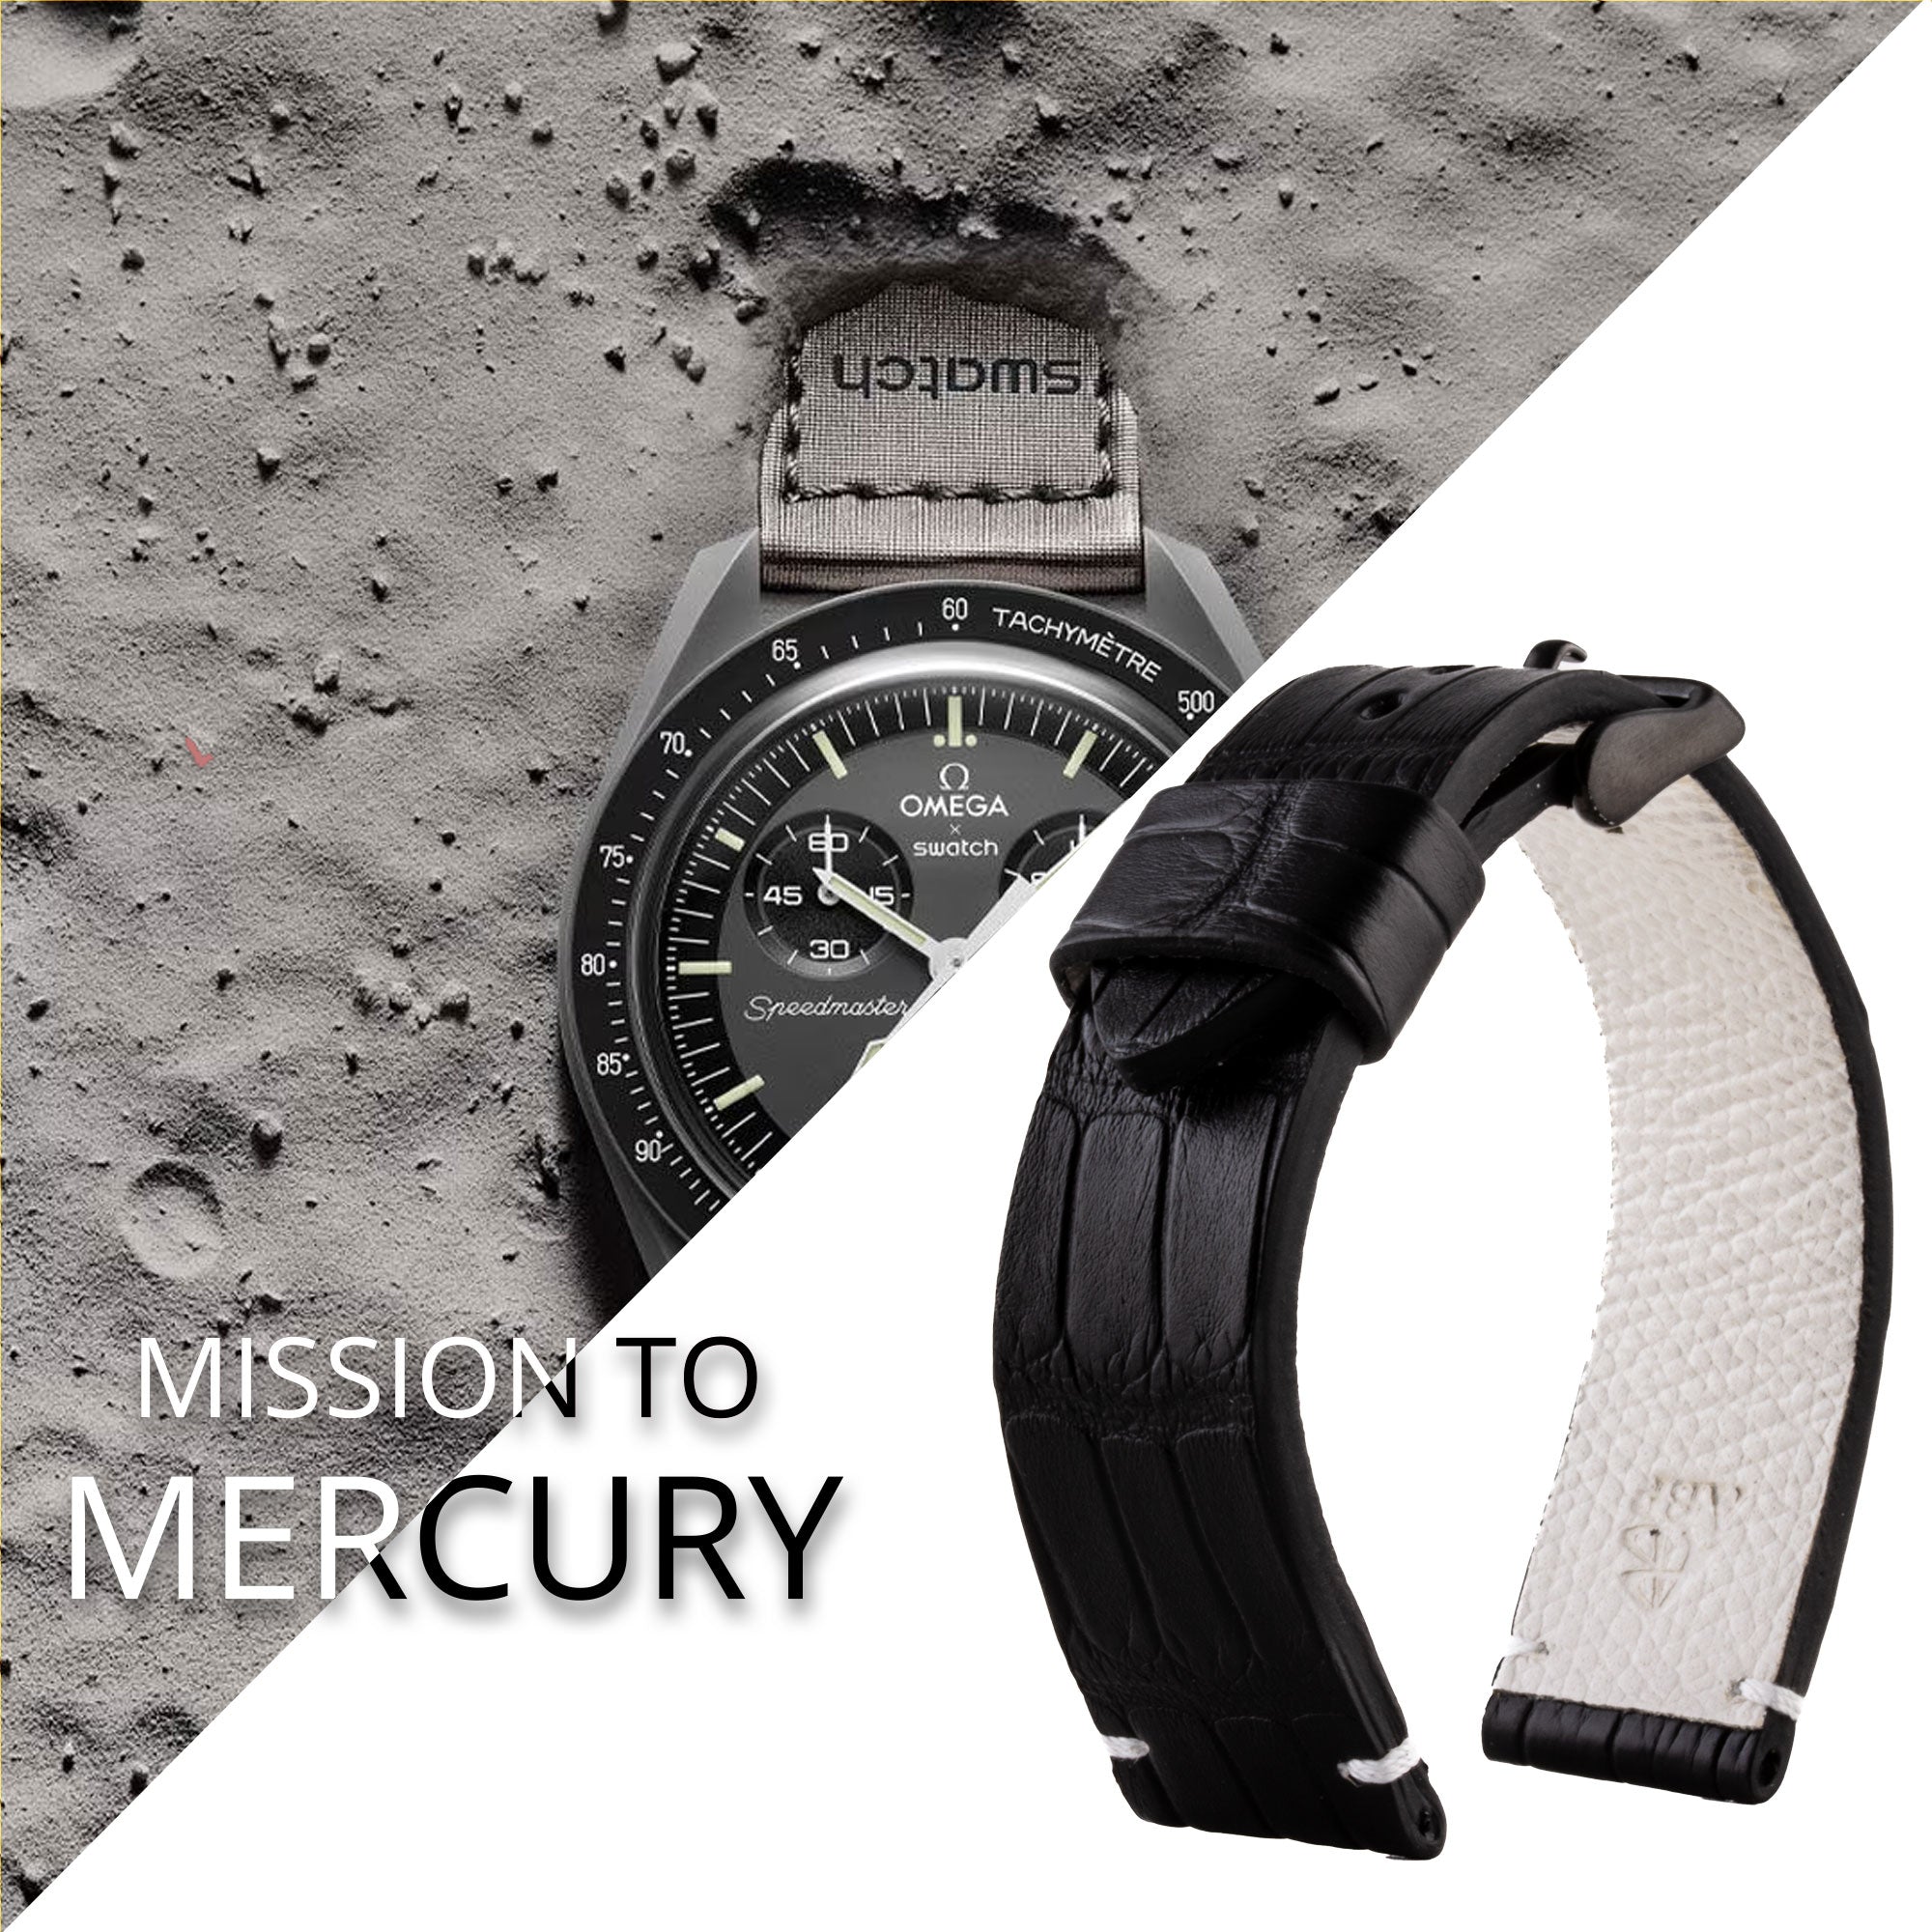 Tribute to MoonSwatch Omega X Swatch - "Mission to..." leather watch strap - Alligator with contrasted stitching (black, blue, red...)